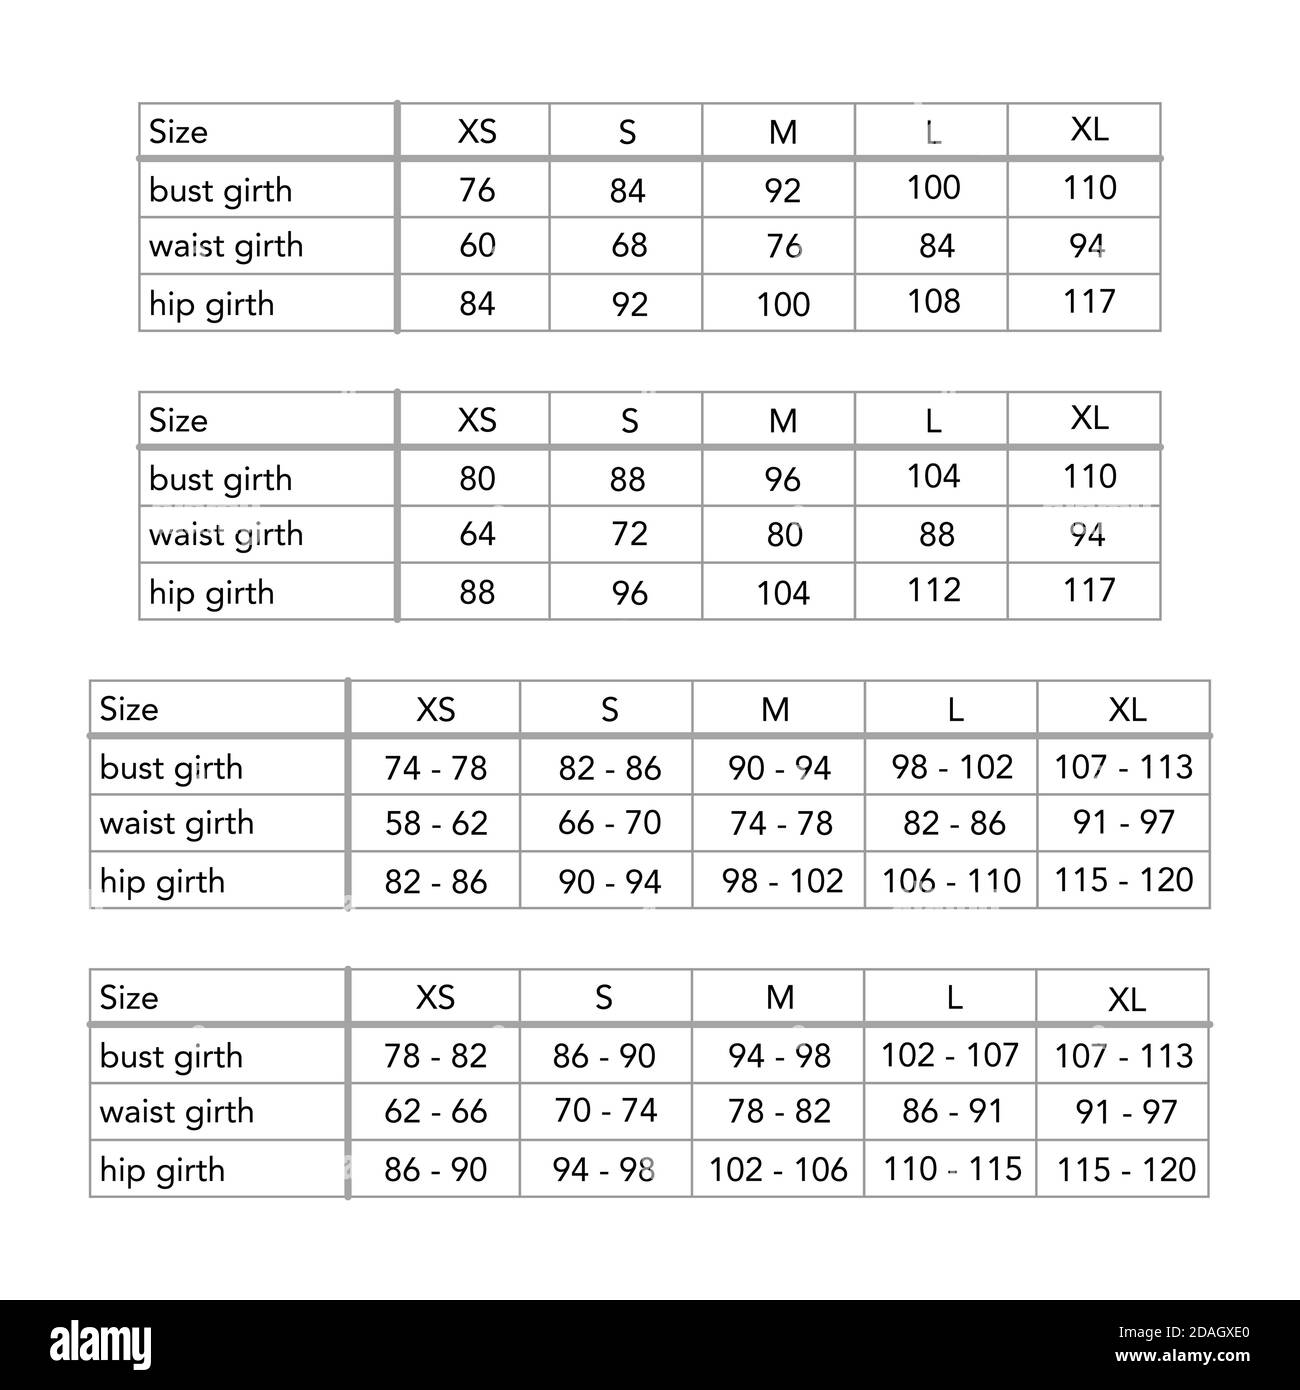 Men new European system clothing standard body measurements for different brands, style fashion size for site, production and online clothes shop. XS, S, M, L, XL, bust, waist, hip girth